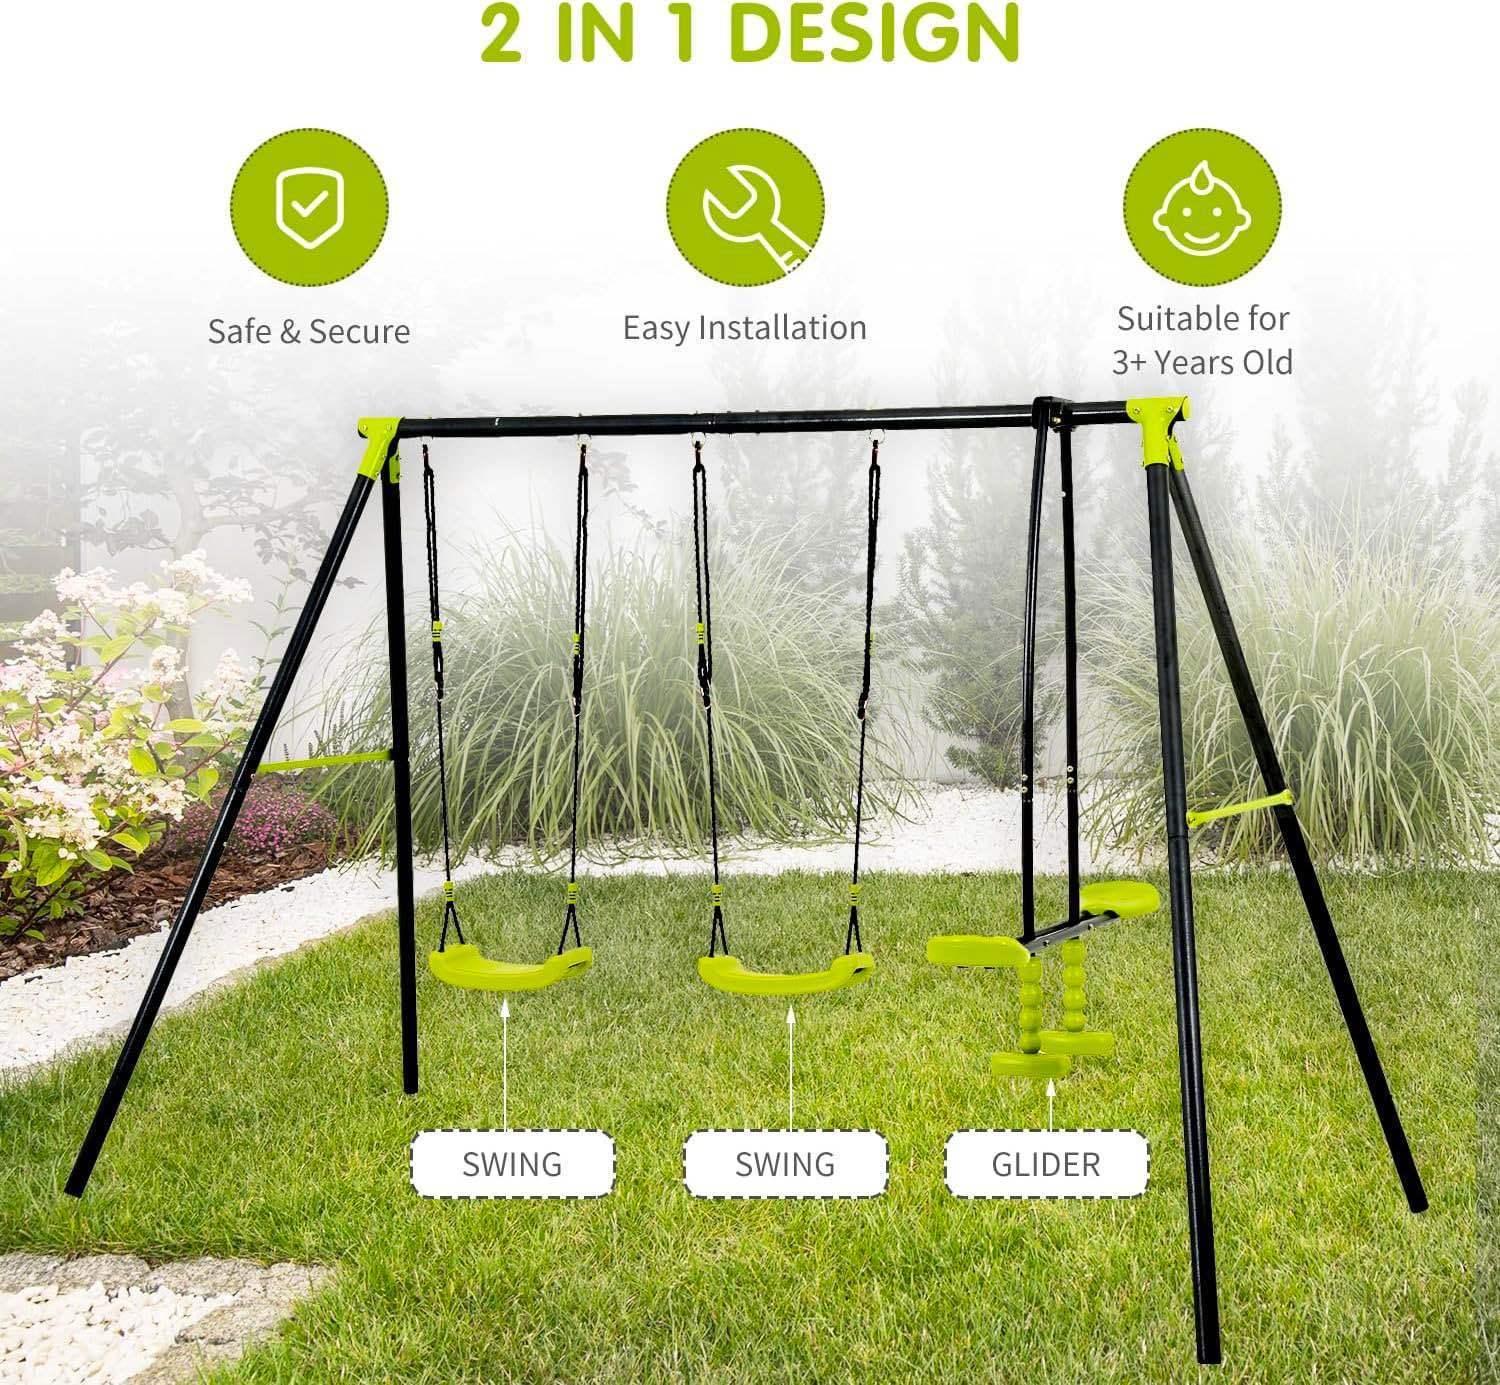 🆓🚛 Interesting Triple Children Metal Safe Swing Set 440Lbs for Outdoor Playground Three Seat Swing Black & Green for Age 3+